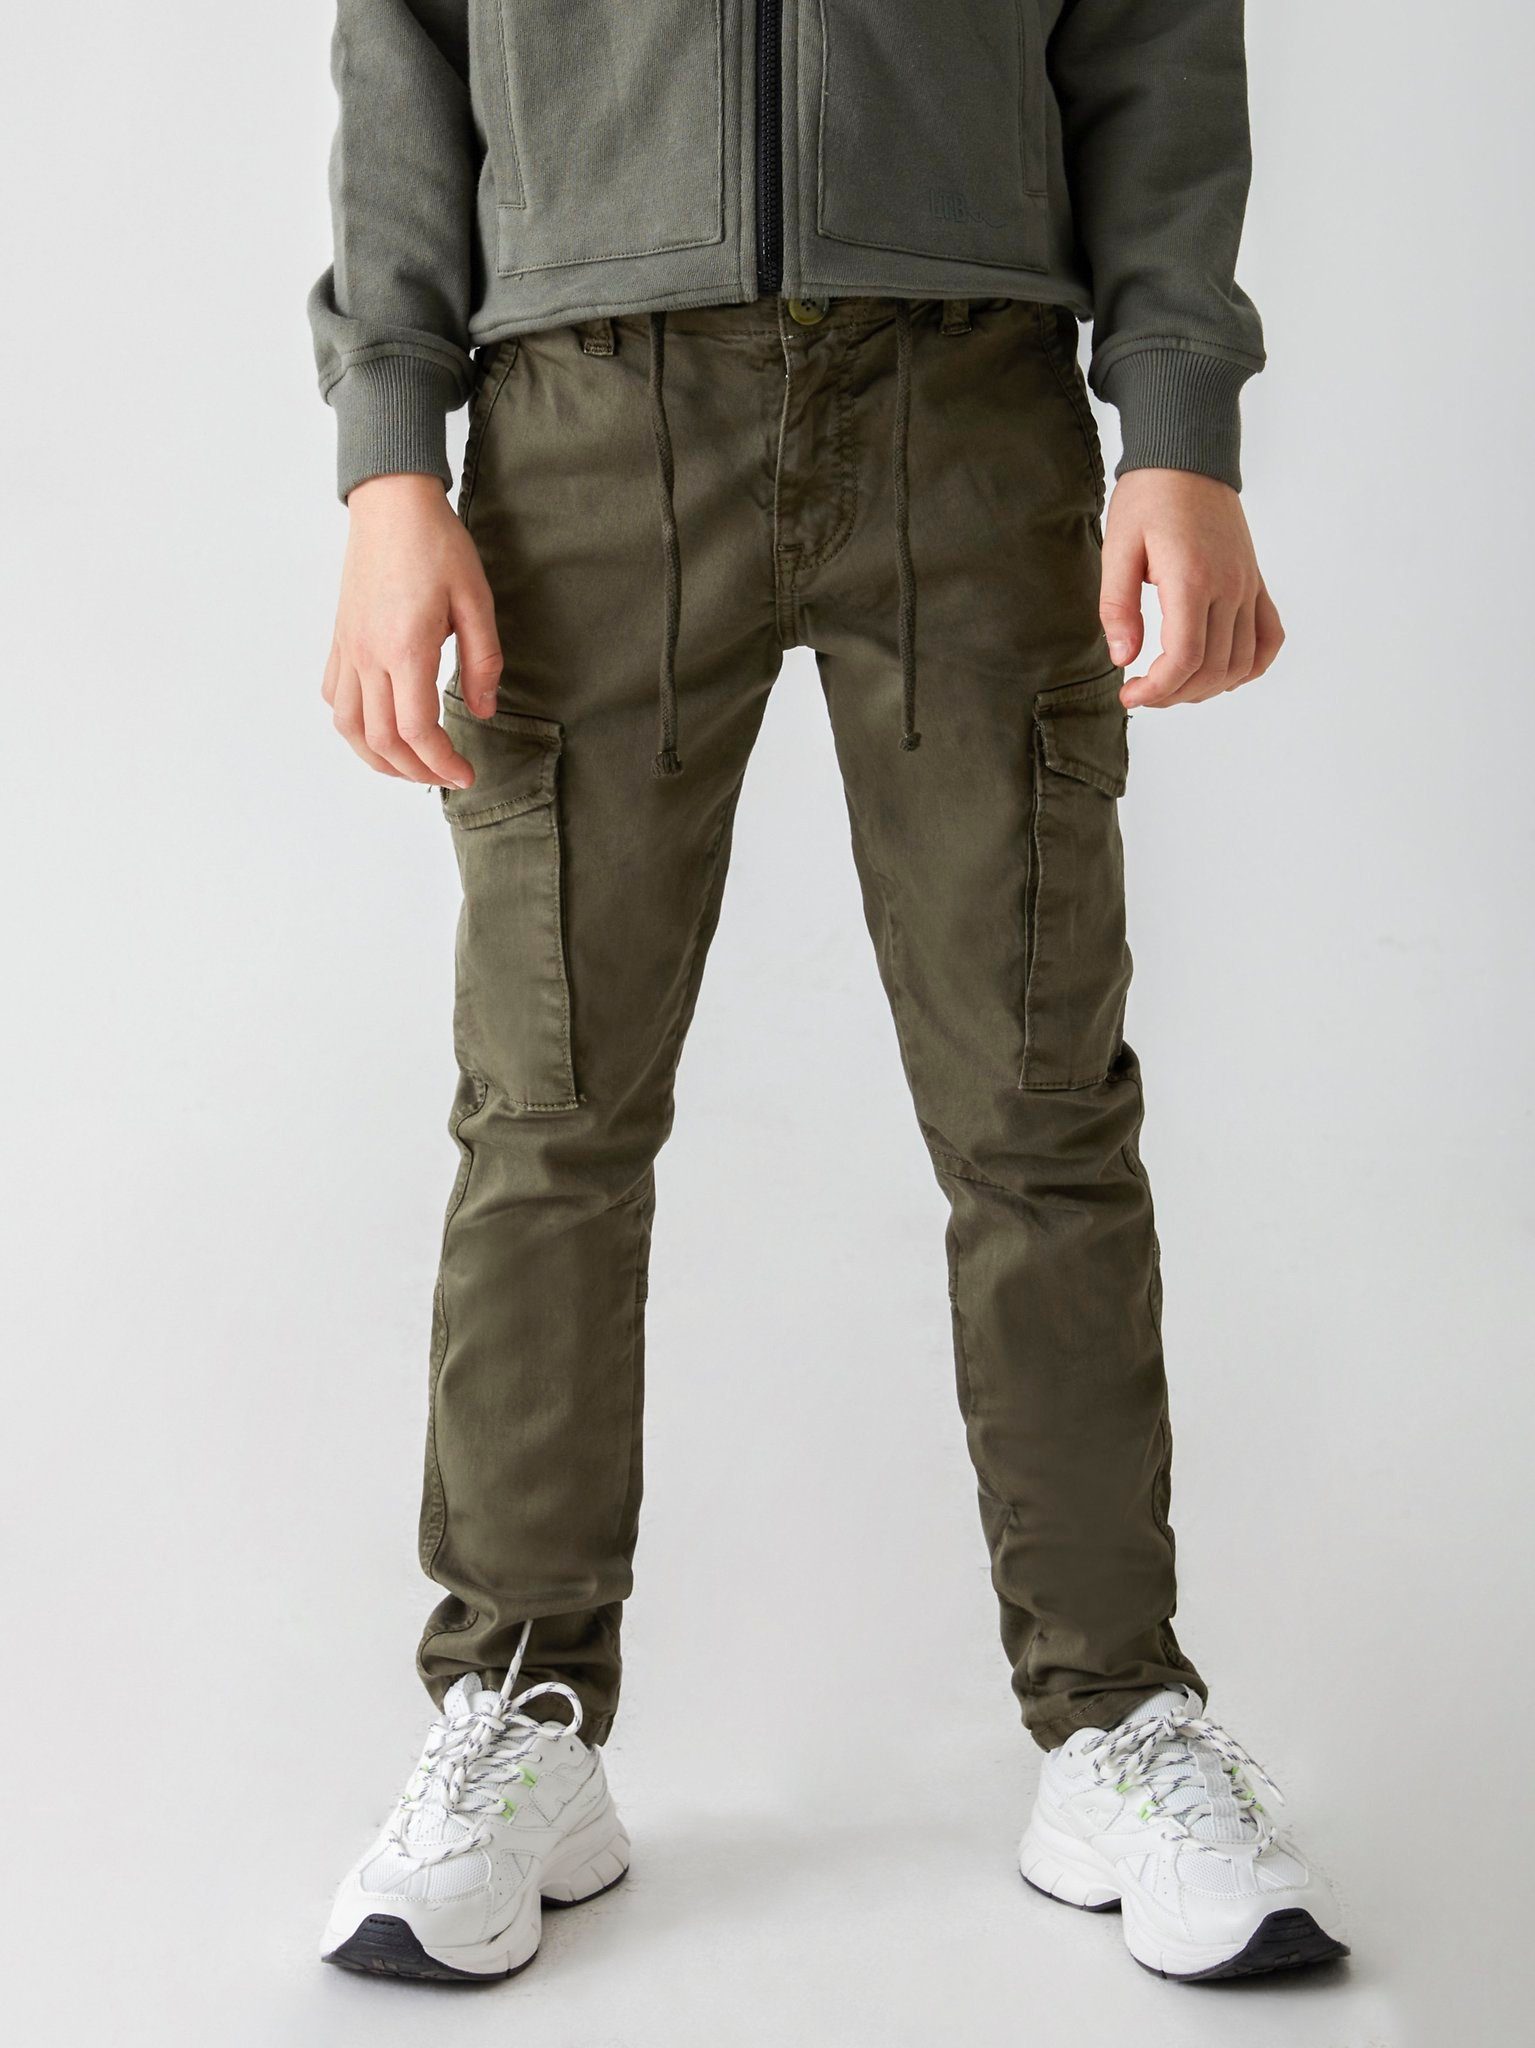 Dusty Gebozo LTB Outdoorhose Pants LTB Olive